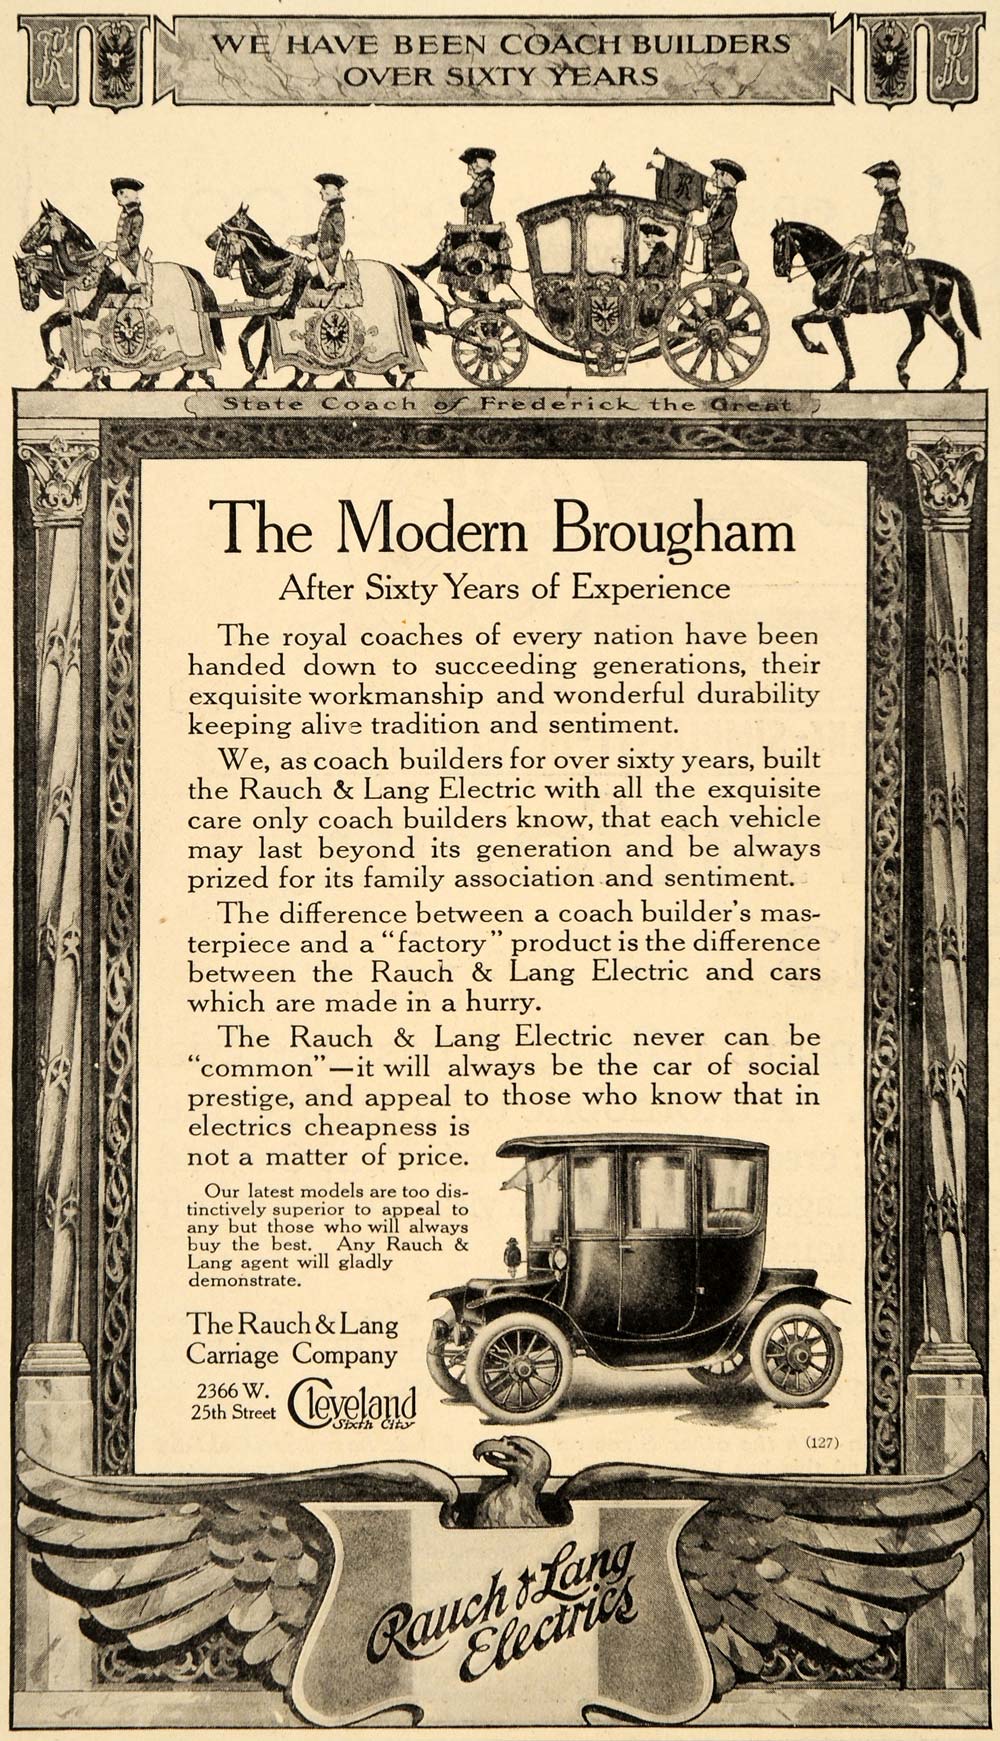 1912 Ad Brougham Rauch Lang Electric Carriage Company - ORIGINAL ADVERTISING OD1